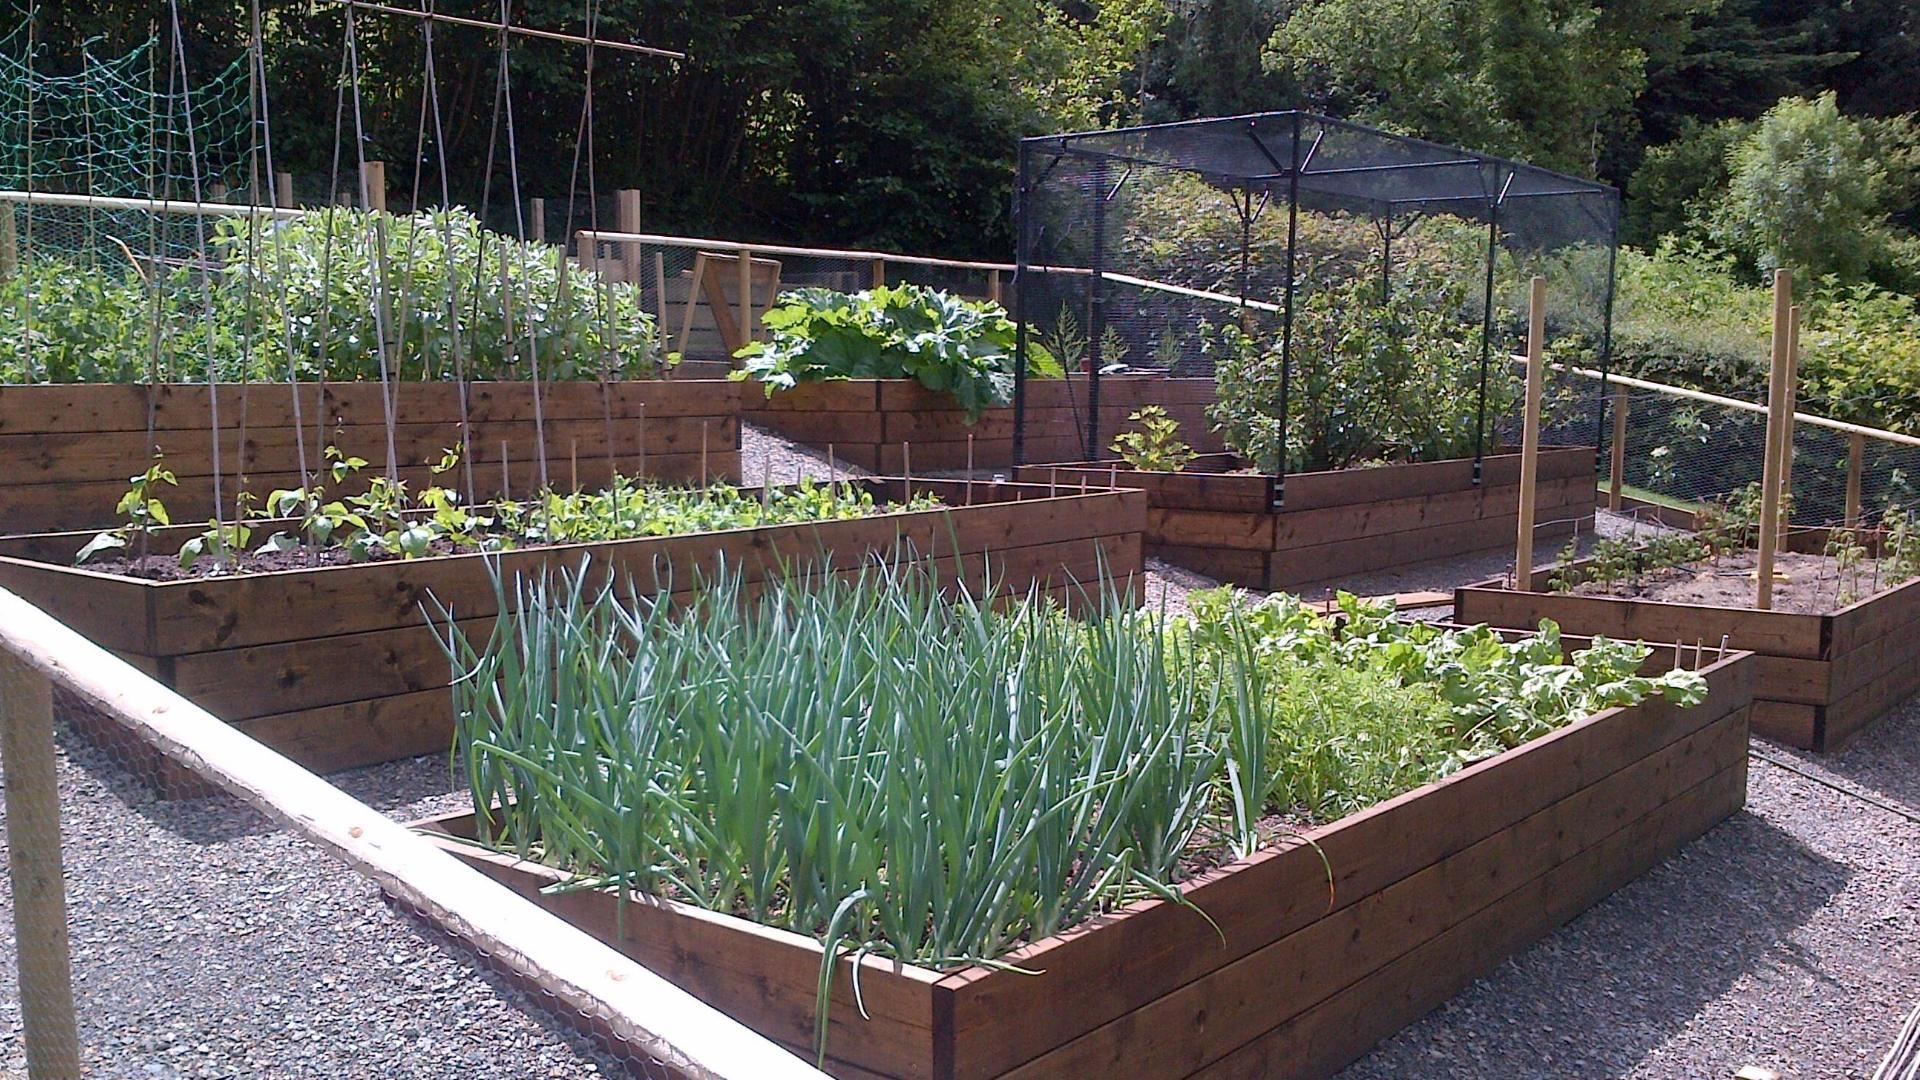 Raised beds on sloping veg garden. Fruit cage in situ.